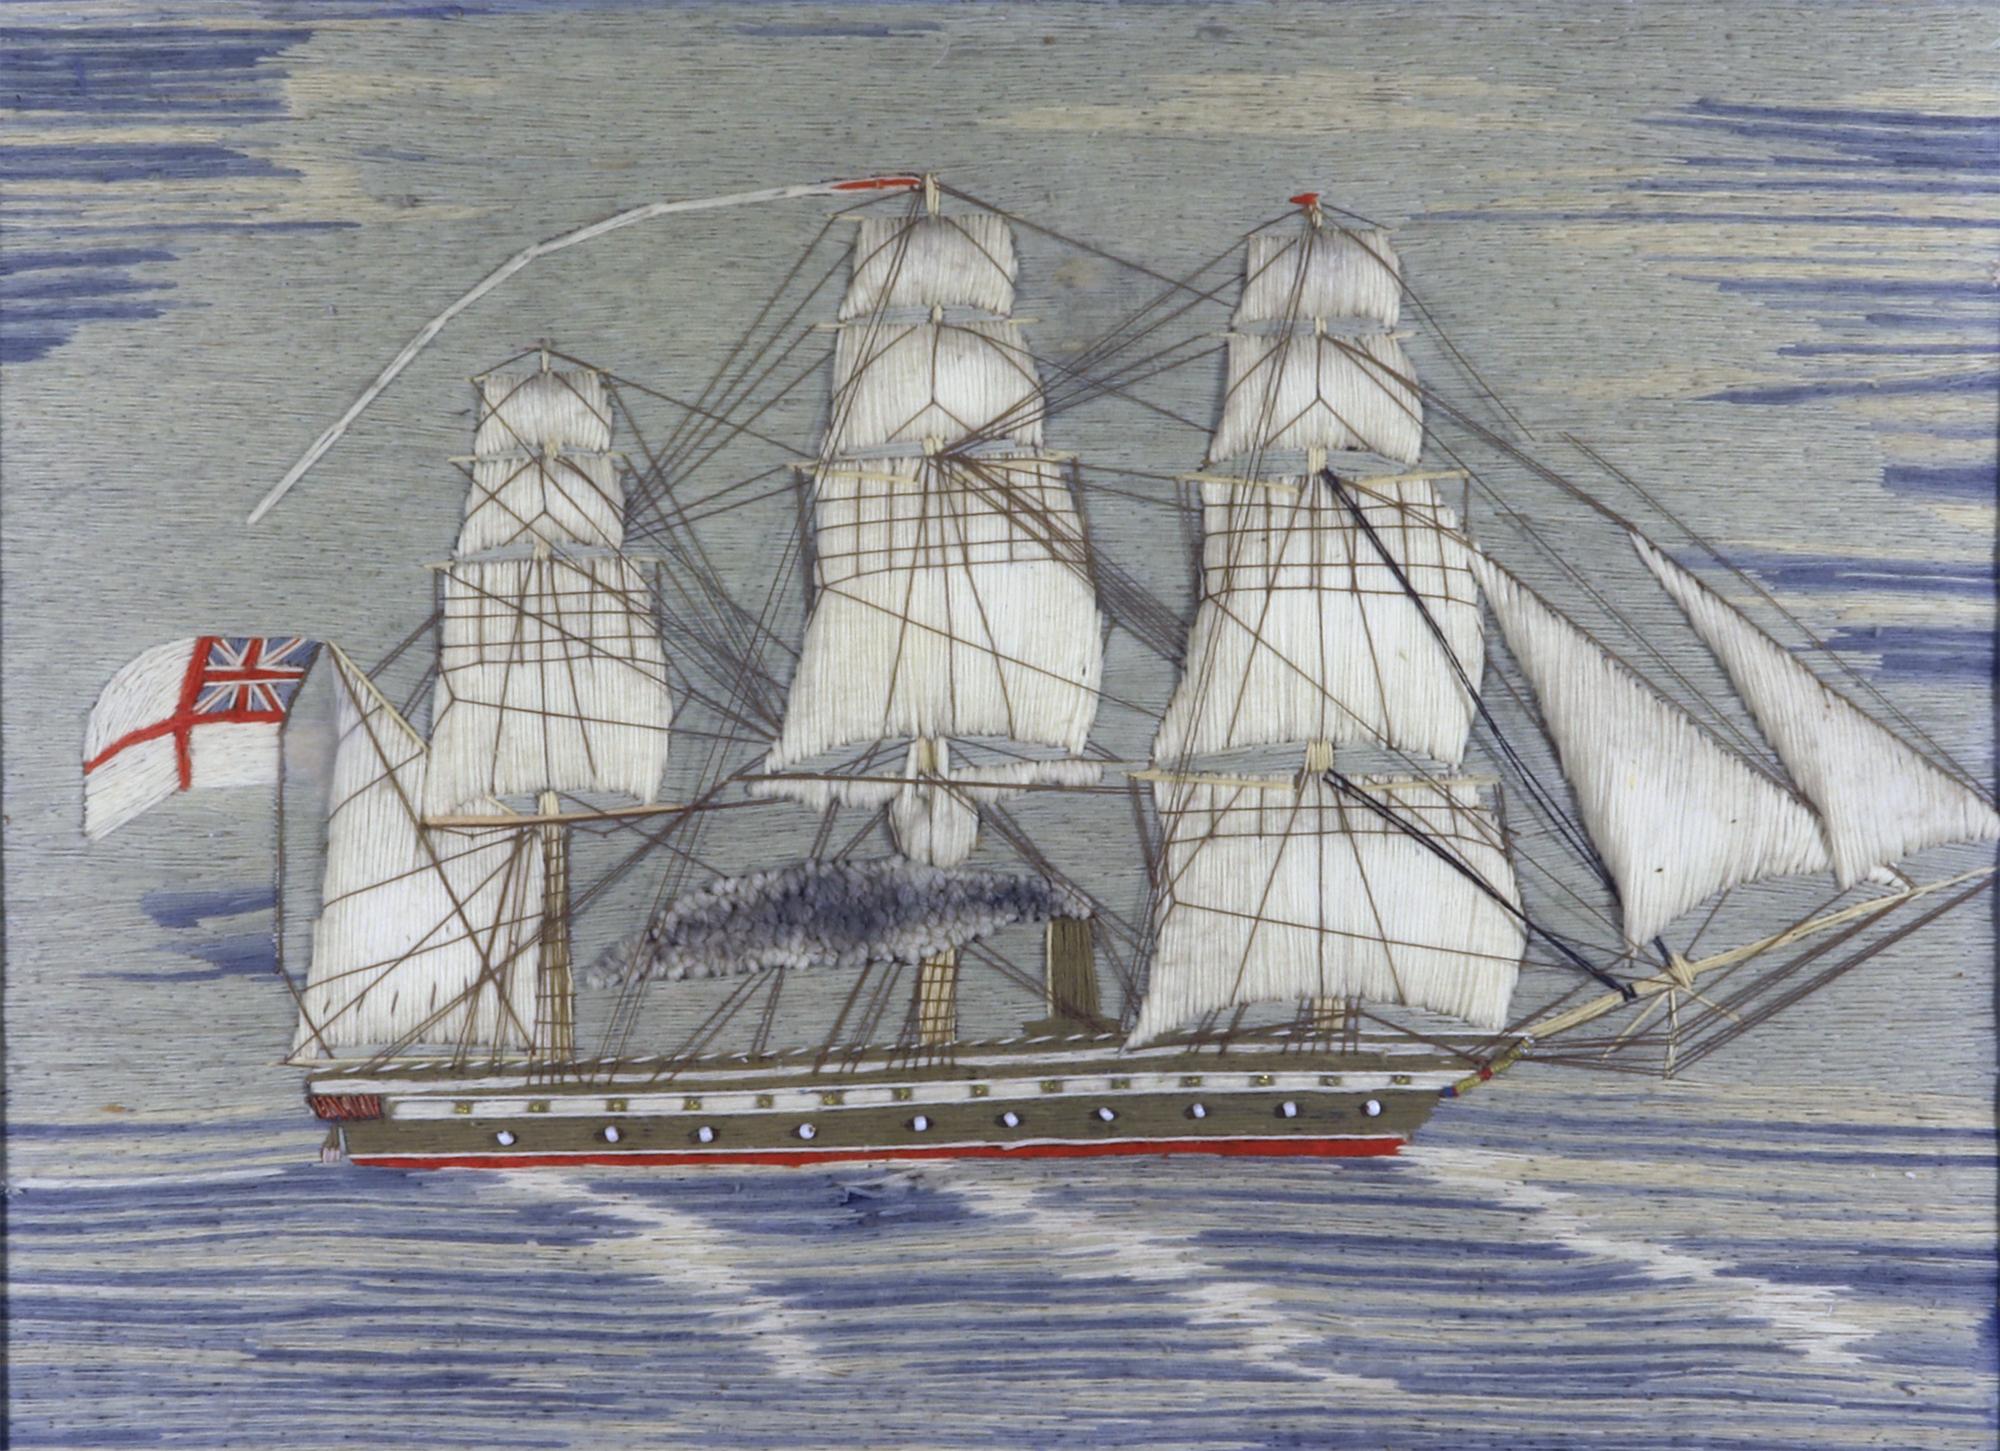 Sailor's Woolwork Woolie with Trapunto Sails, Circa 1875

The sailor's woolwork depicts a starboard view of a three-masted British Royal Navy Vessel flying the White Ensign with a white banner flying from the mainmast under full sail and with